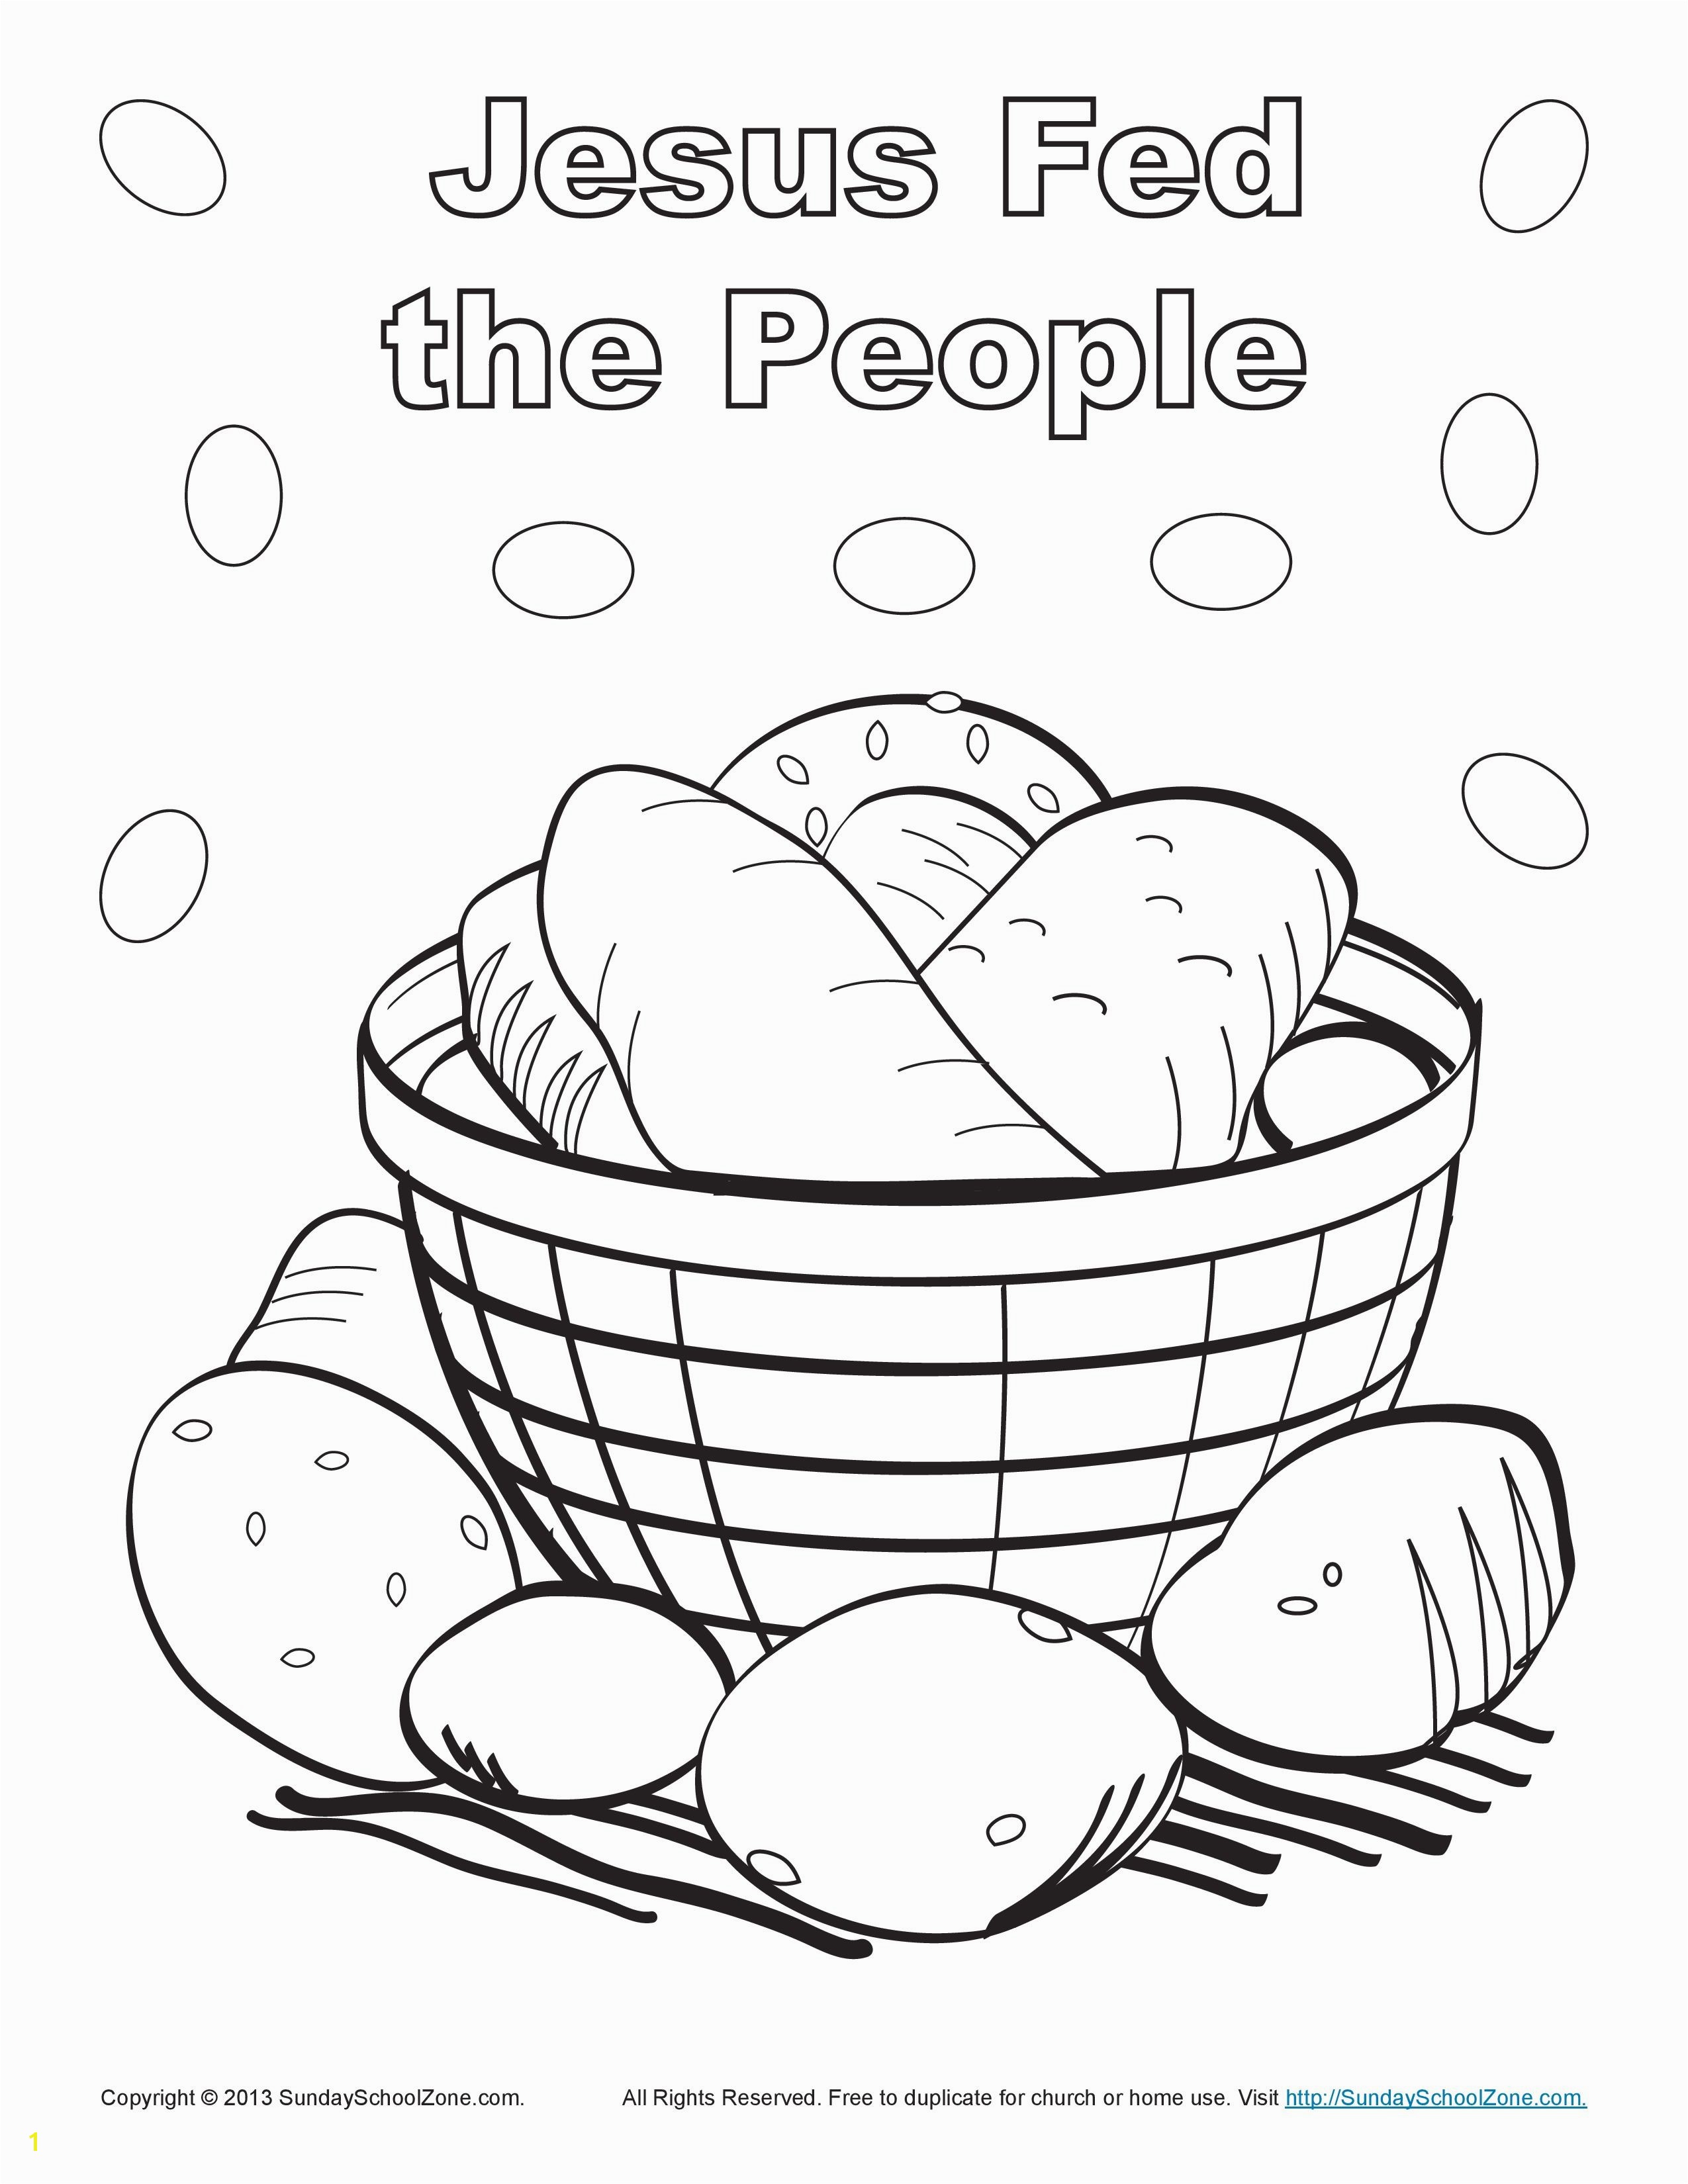 Jesus Fed the People Bible Coloring Page